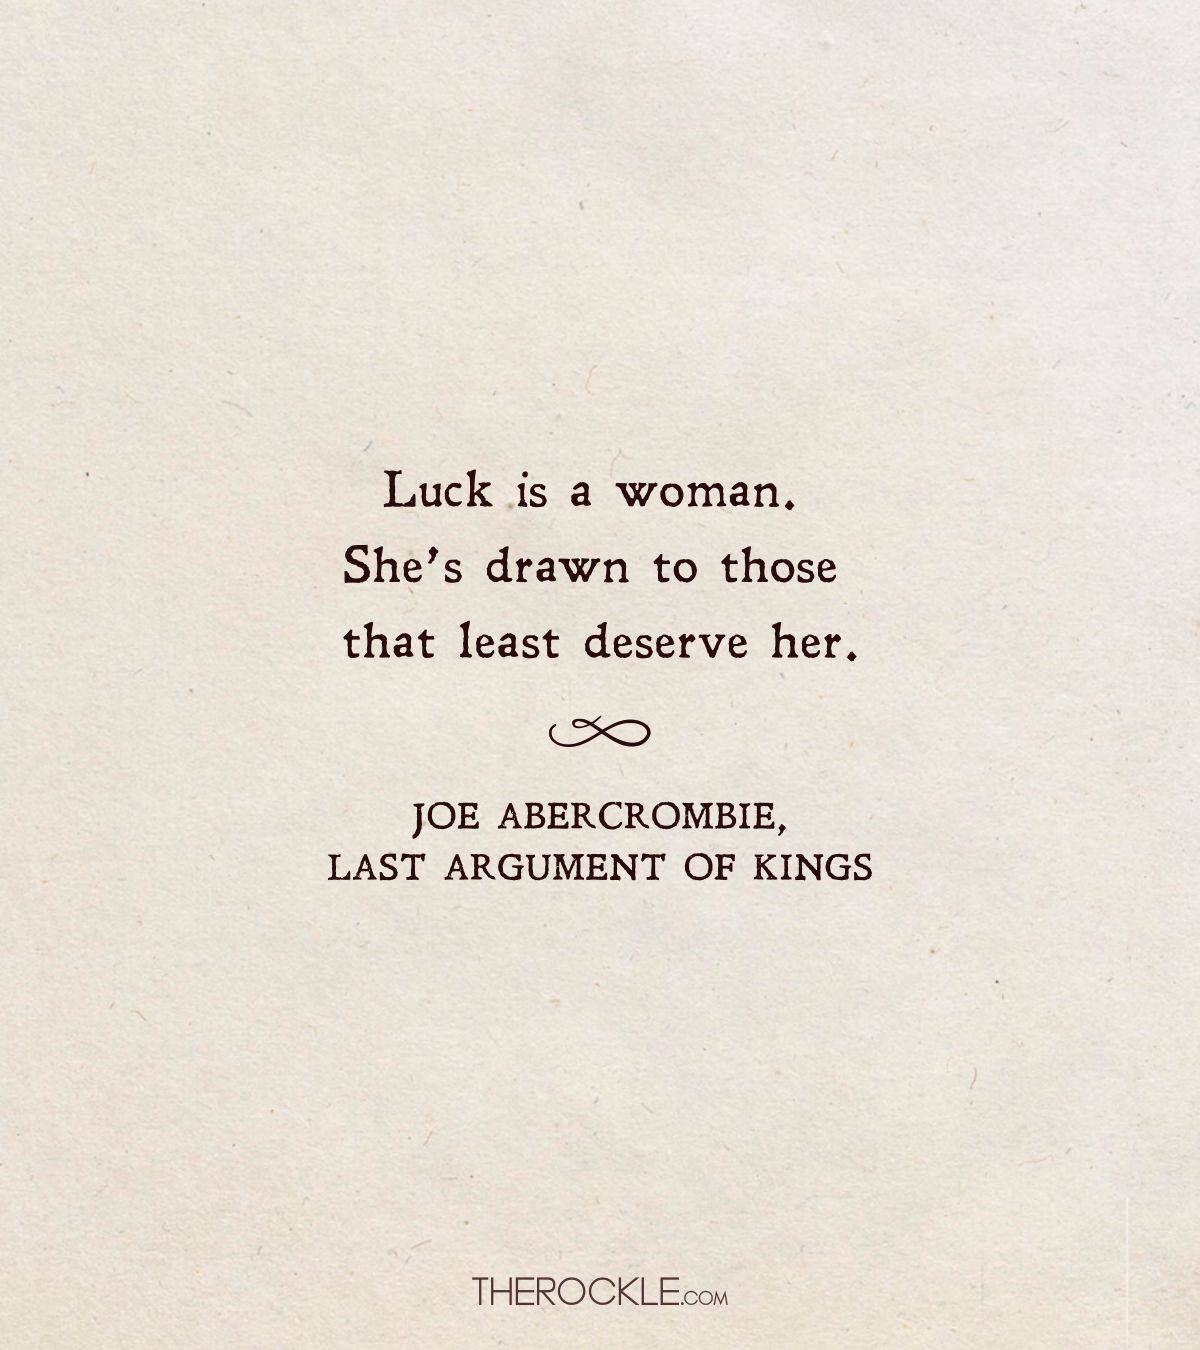 Joe Abercrombie's witty quote on luck